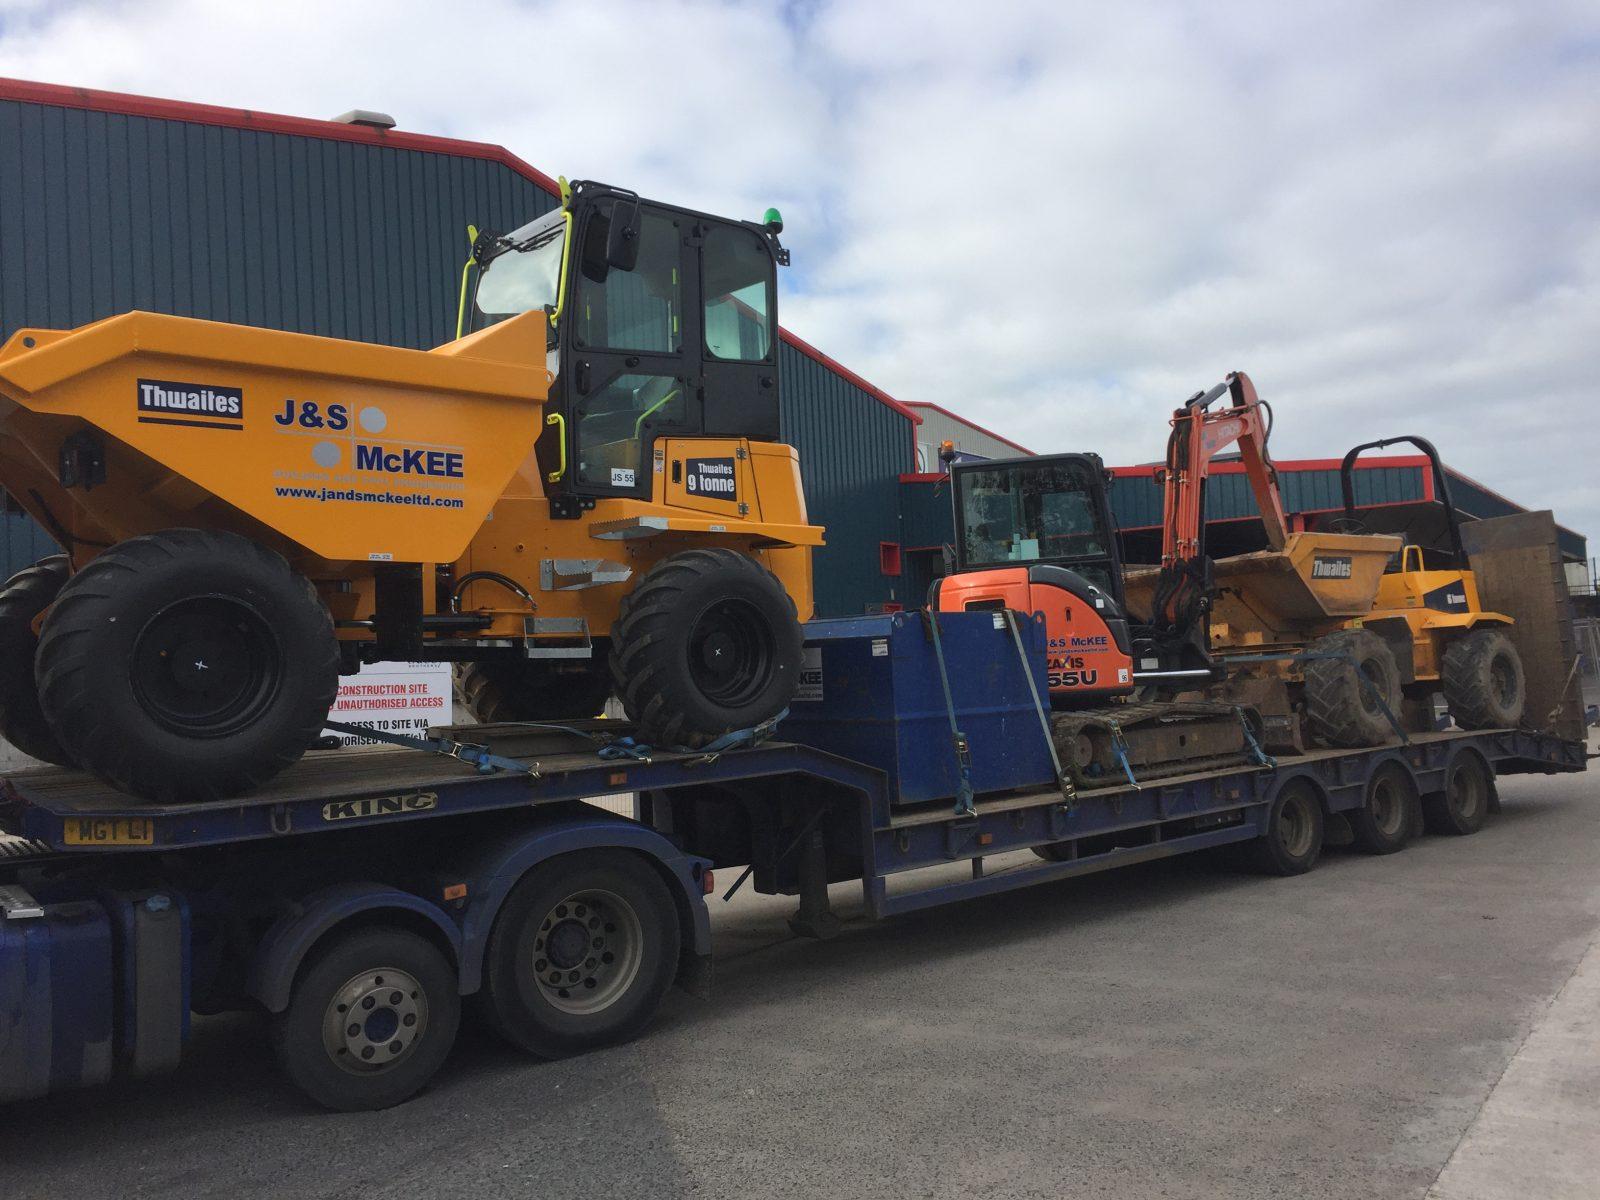 Dumpers and diggers ready for home